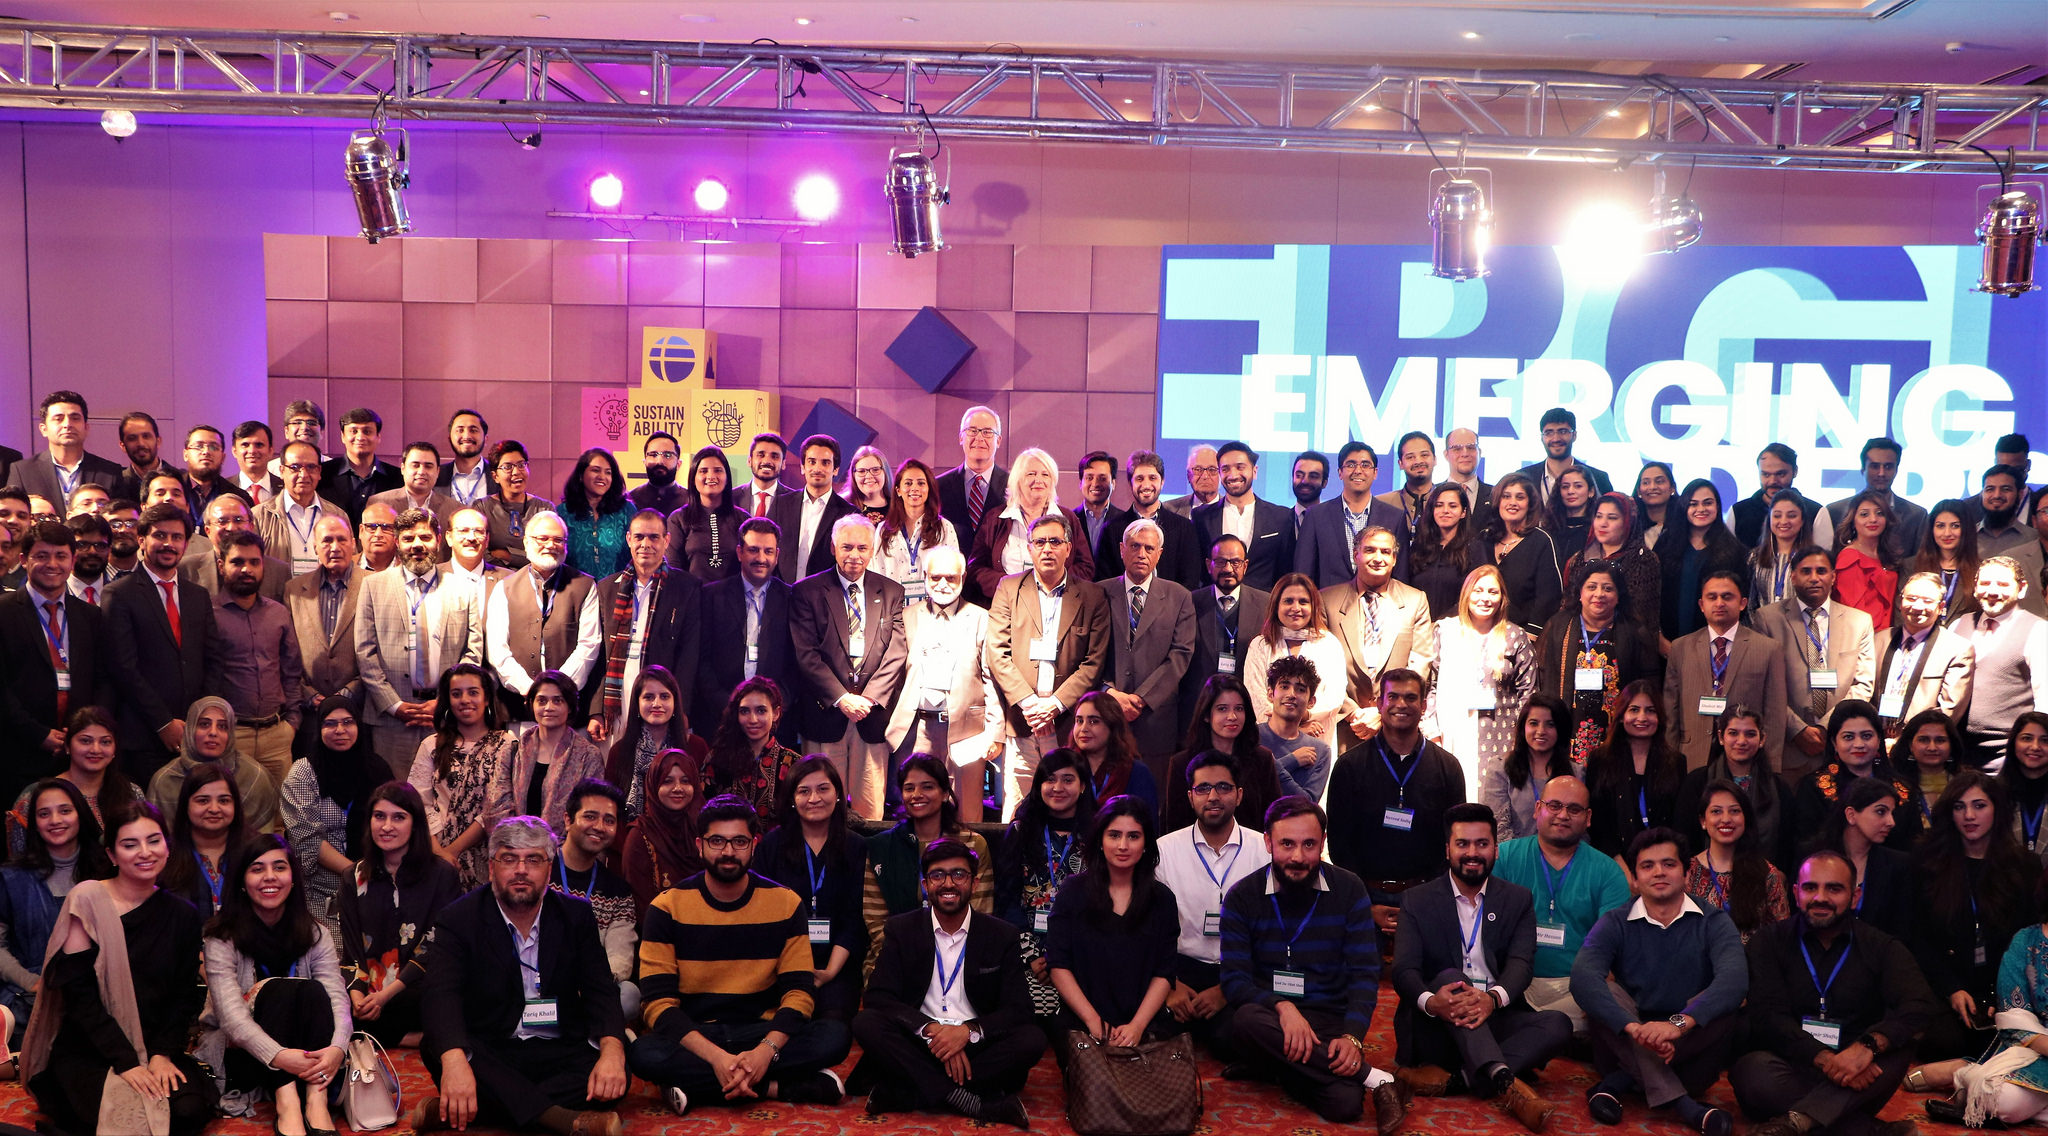 Over 200 Fulbright alumni from across Pakistan attended the 15th annual Fulbright Alumni Conference